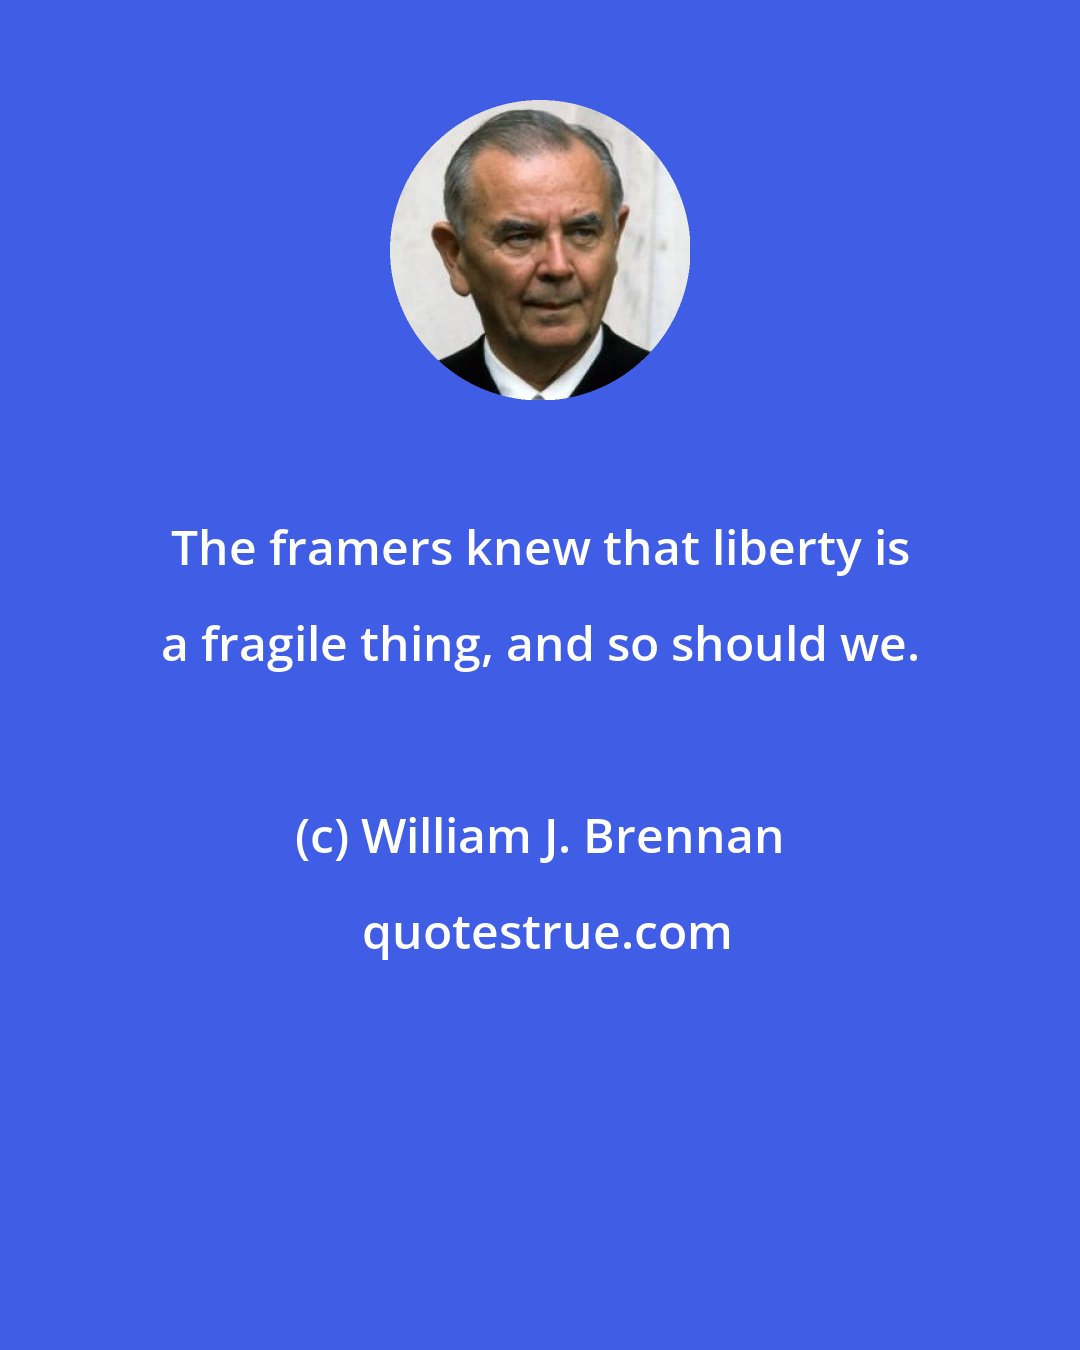 William J. Brennan: The framers knew that liberty is a fragile thing, and so should we.